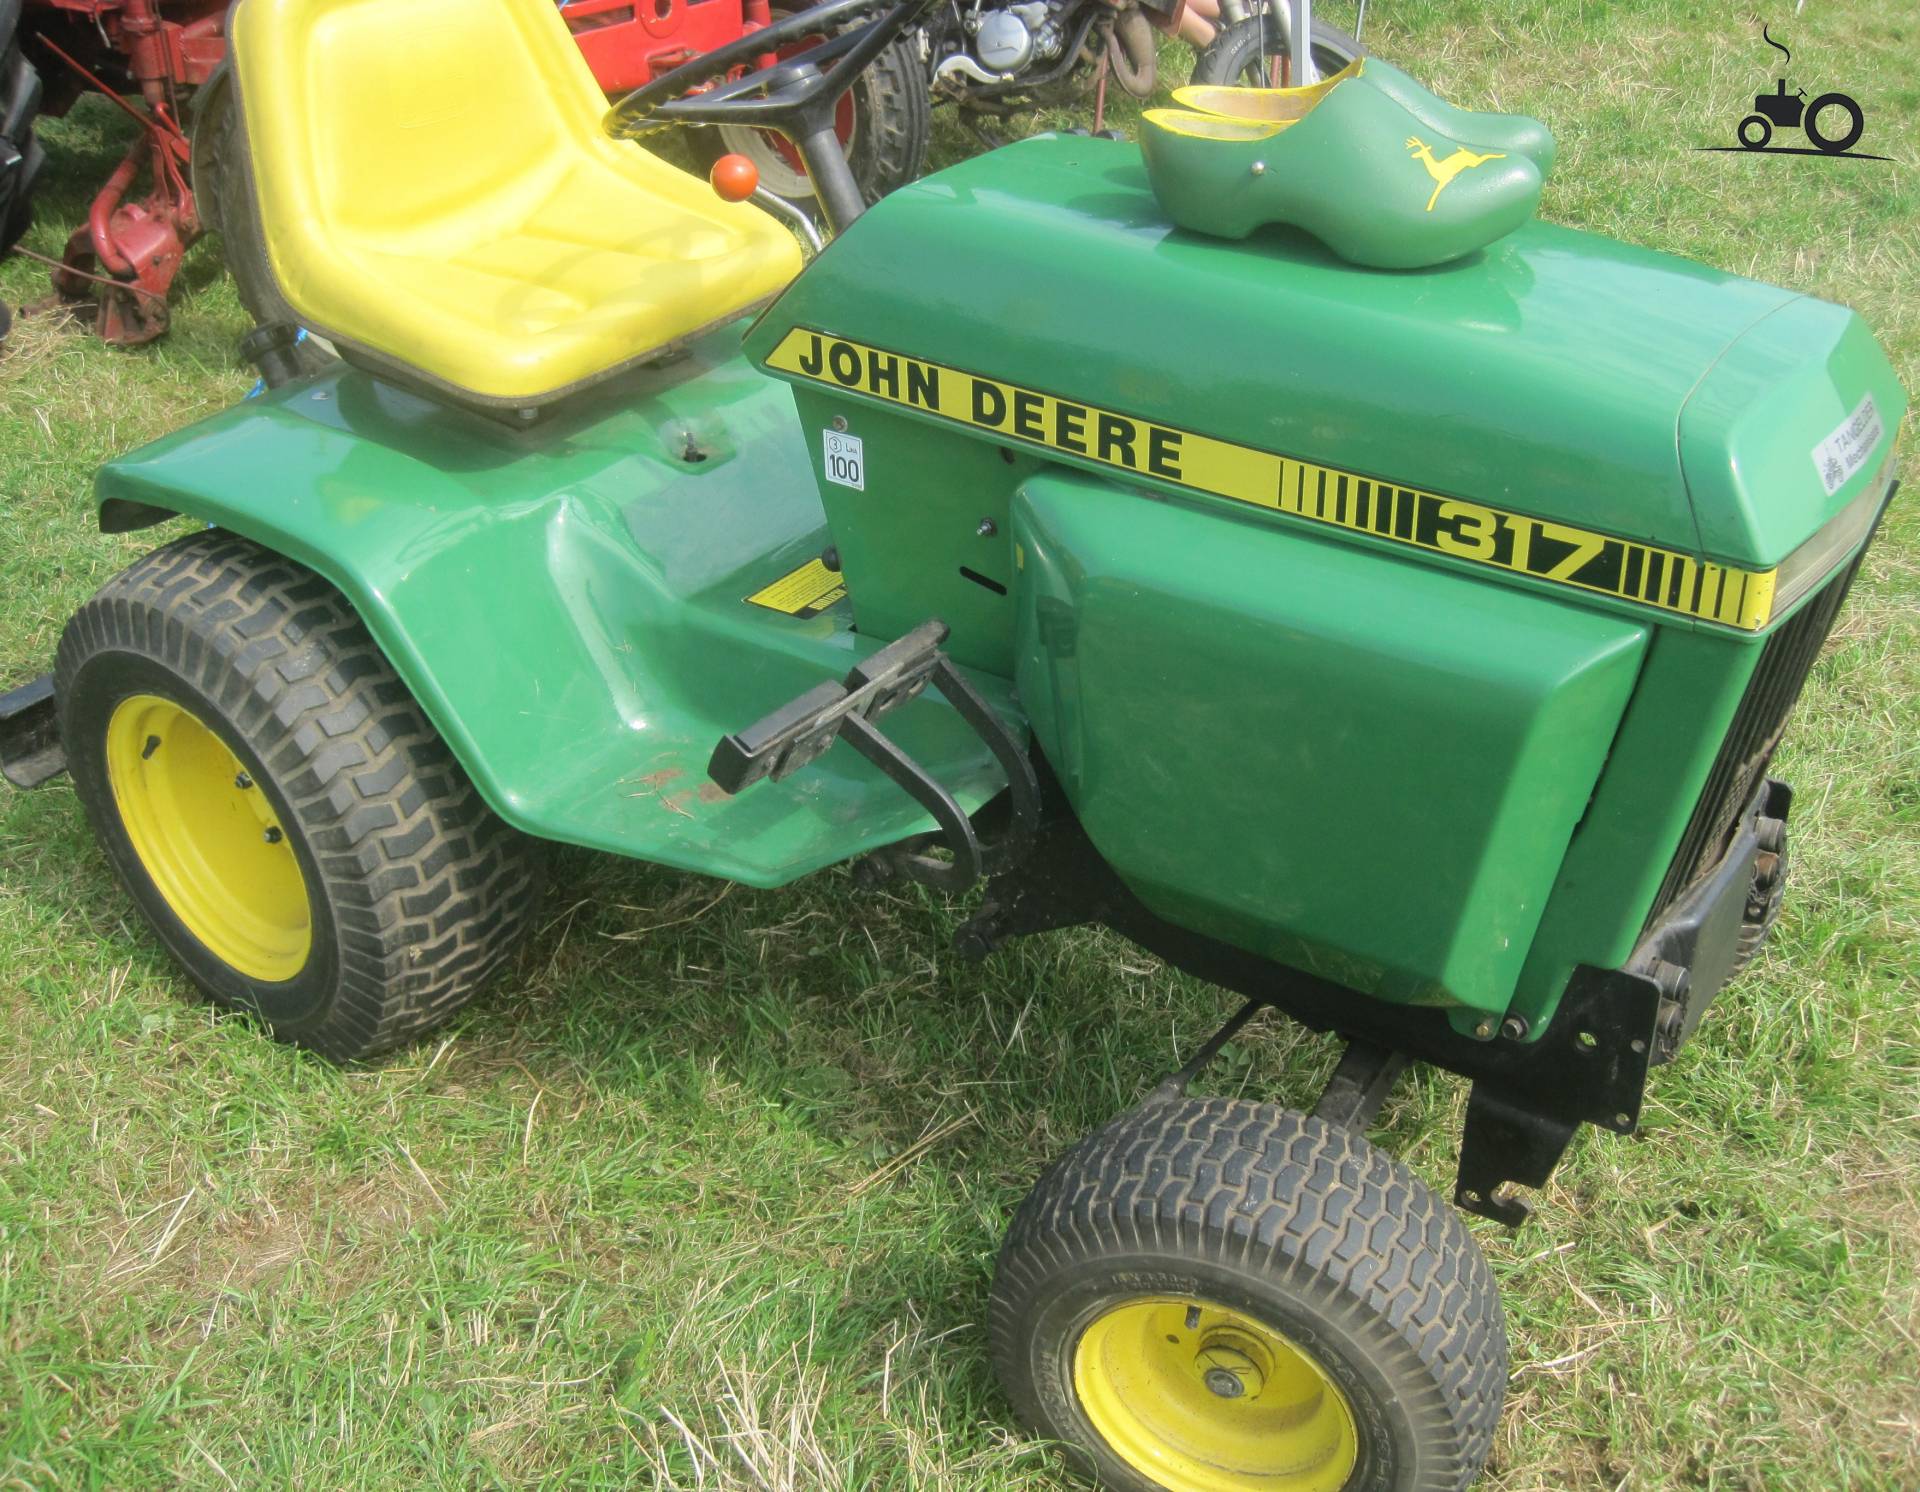 John Deere 317 Specs and data - Everything about the John Deere 317